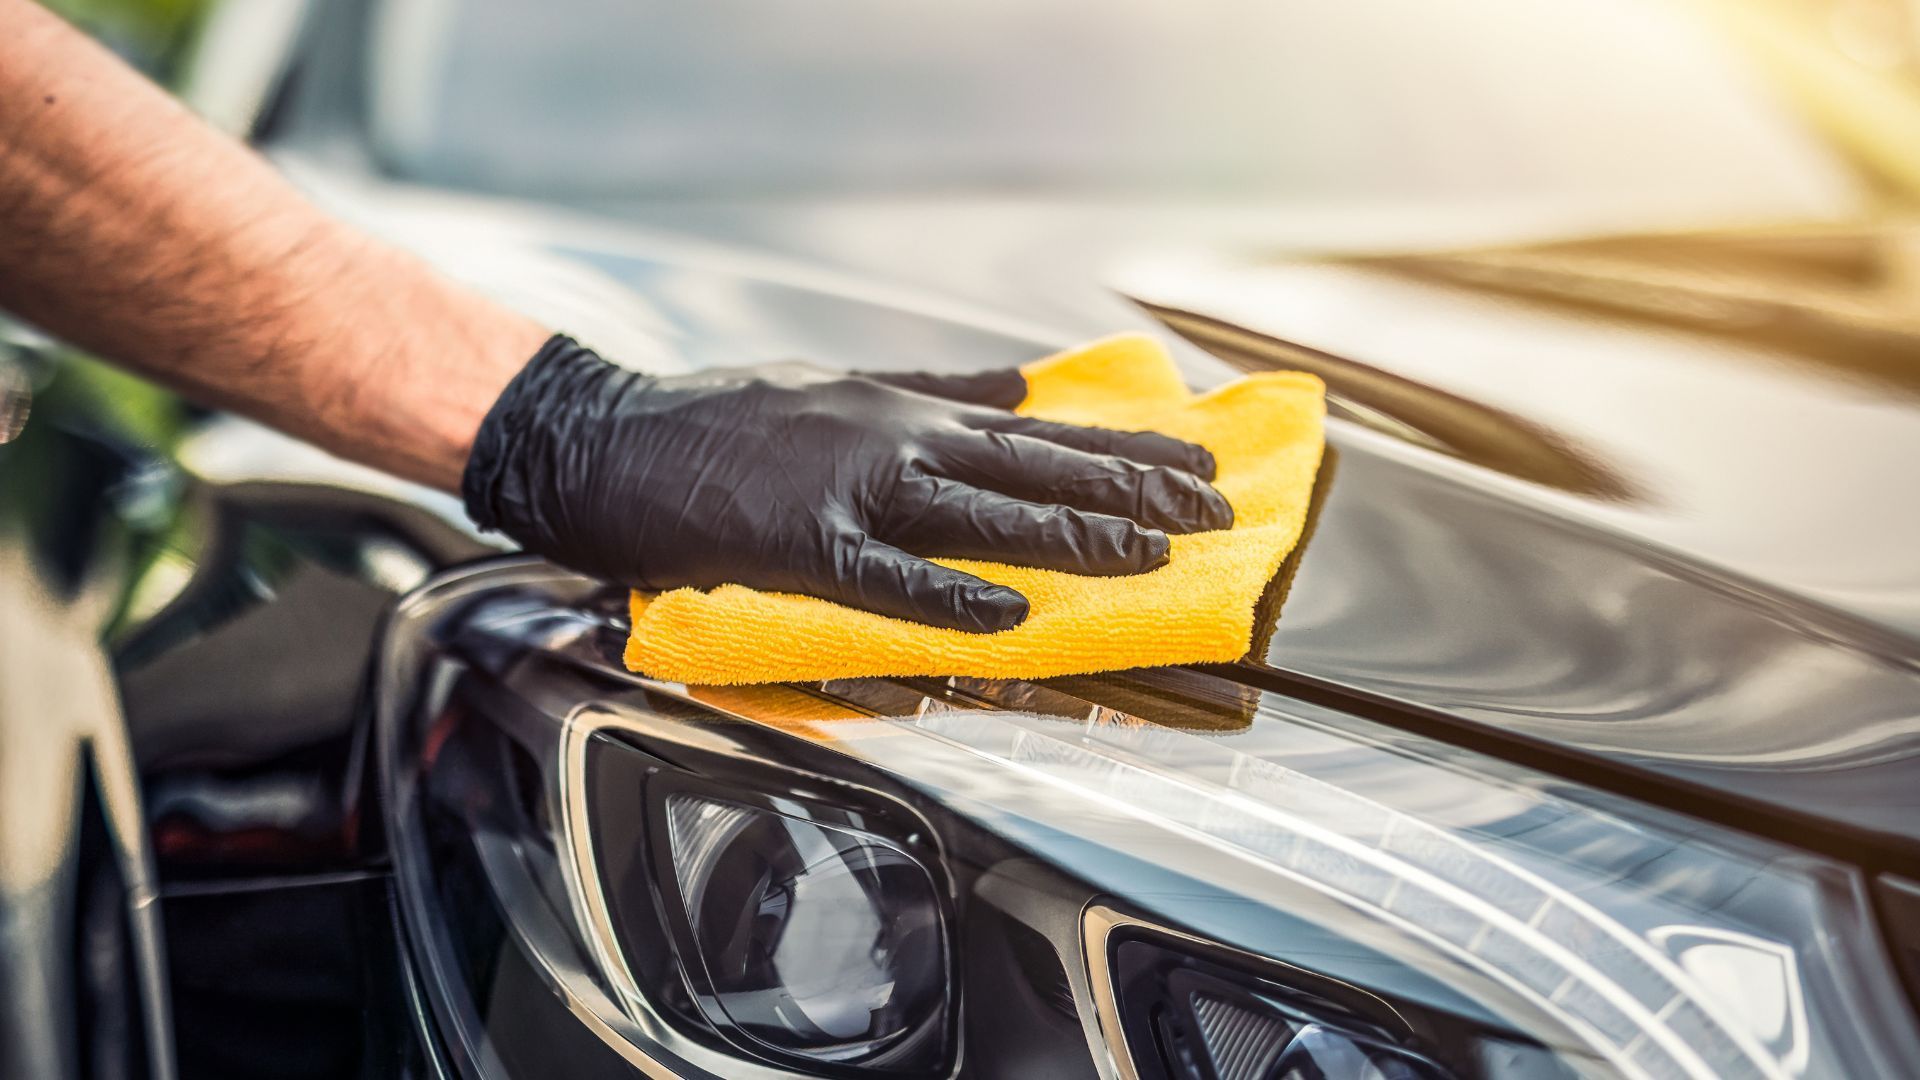 Close-up of a professional automotive detailer's hand, wearing a black glove, meticulously polishing a car's hood with a yellow microfiber cloth in Duluth, Georgia. The reflection on the shiny black paintwork indicates the effectiveness of the detailing work, exemplifying the care and attention to detail that goes into maintaining the vehicle's appearance. The image indicates the high-quality mobile detailing services available in Duluth, enhancing the aesthetic appeal and longevity of the car.